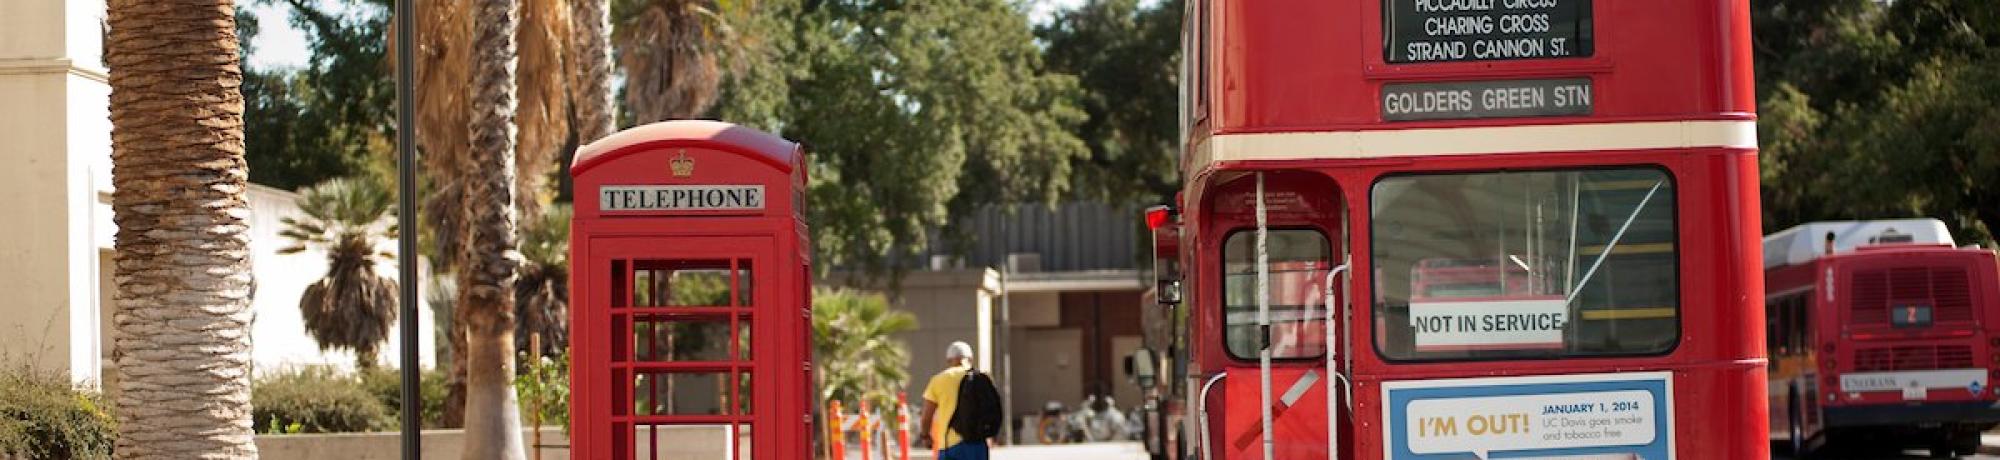 Red telephone booth and red double-decker bus